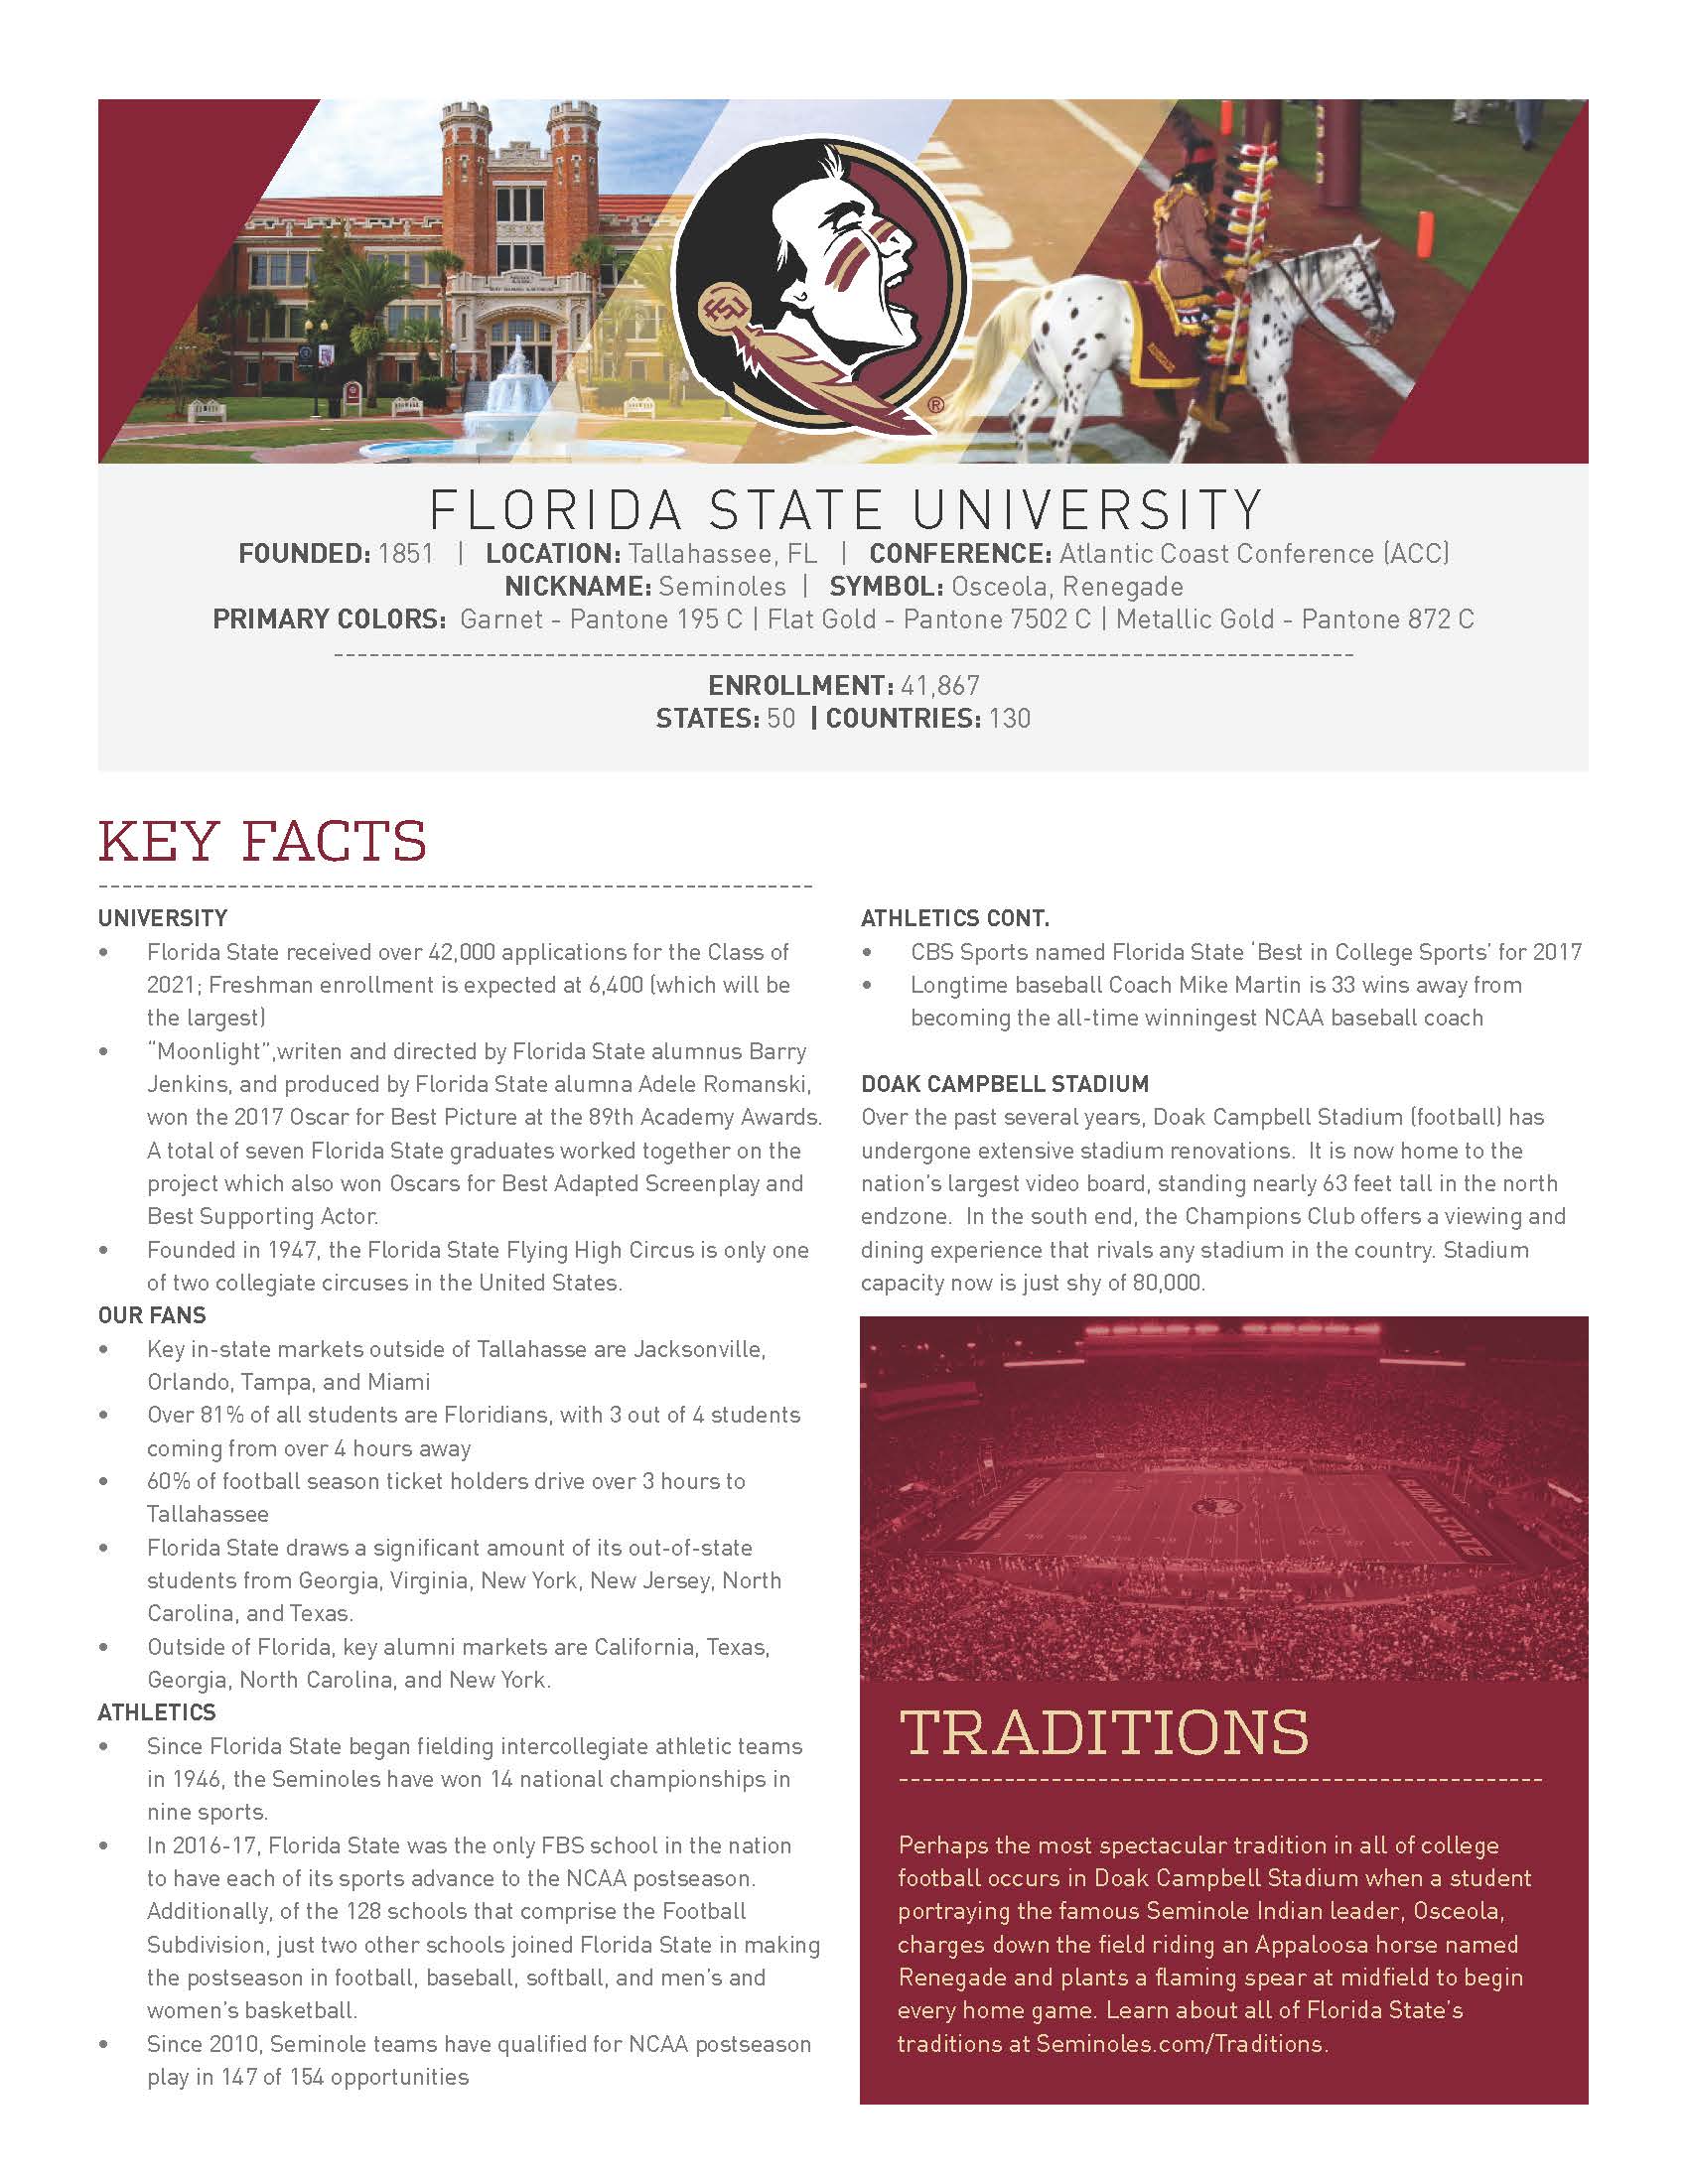 Florida State at a glance page 1